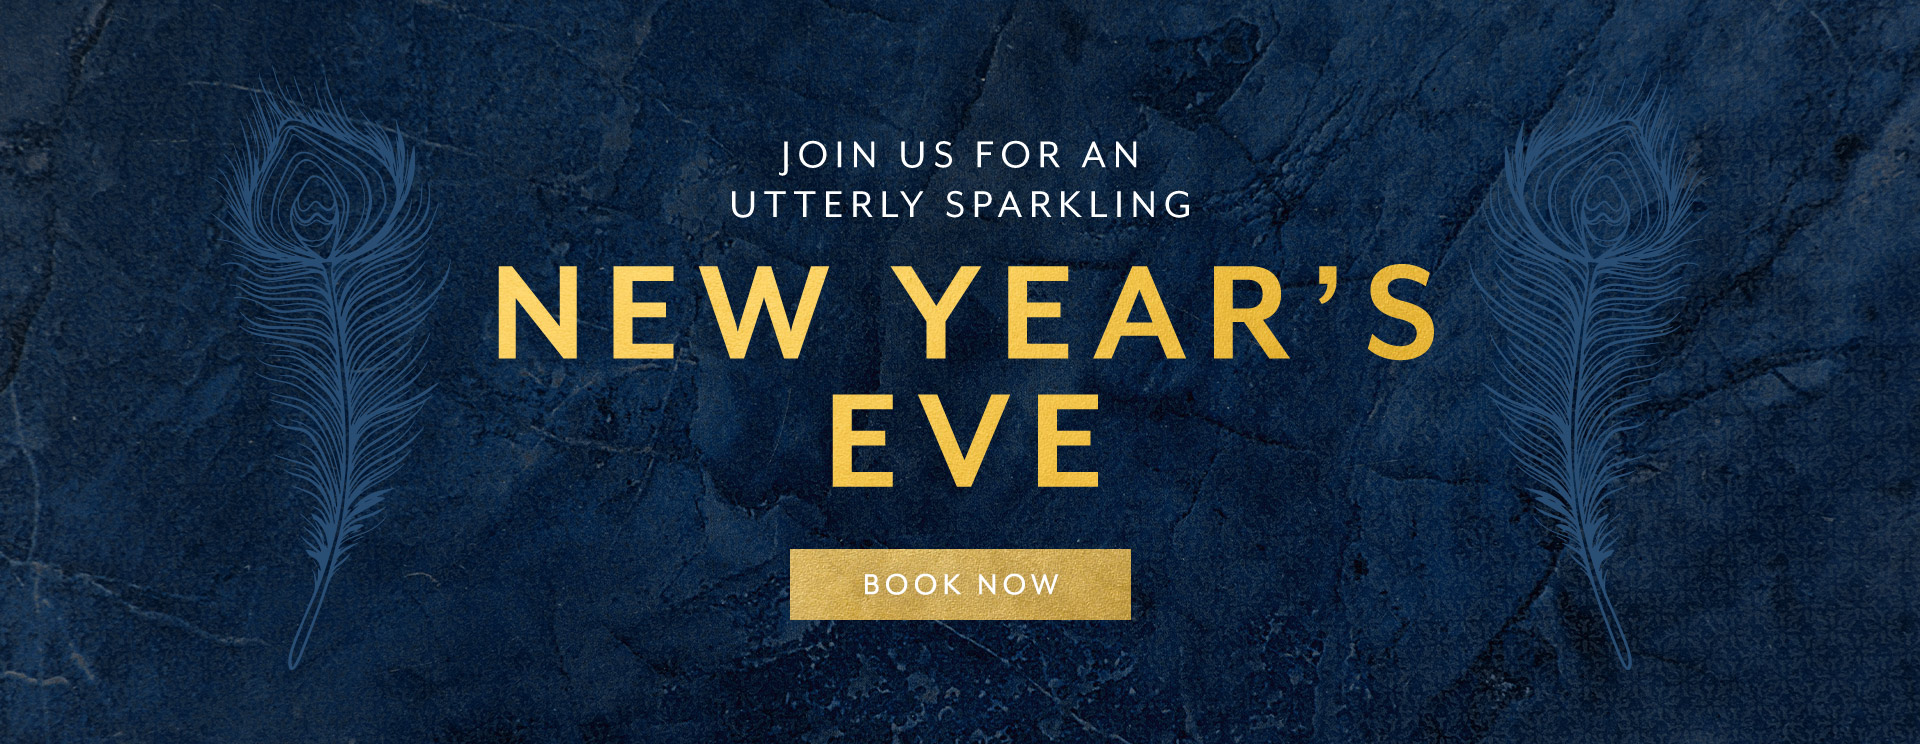 New Year's Eve at The Belvedere Arms